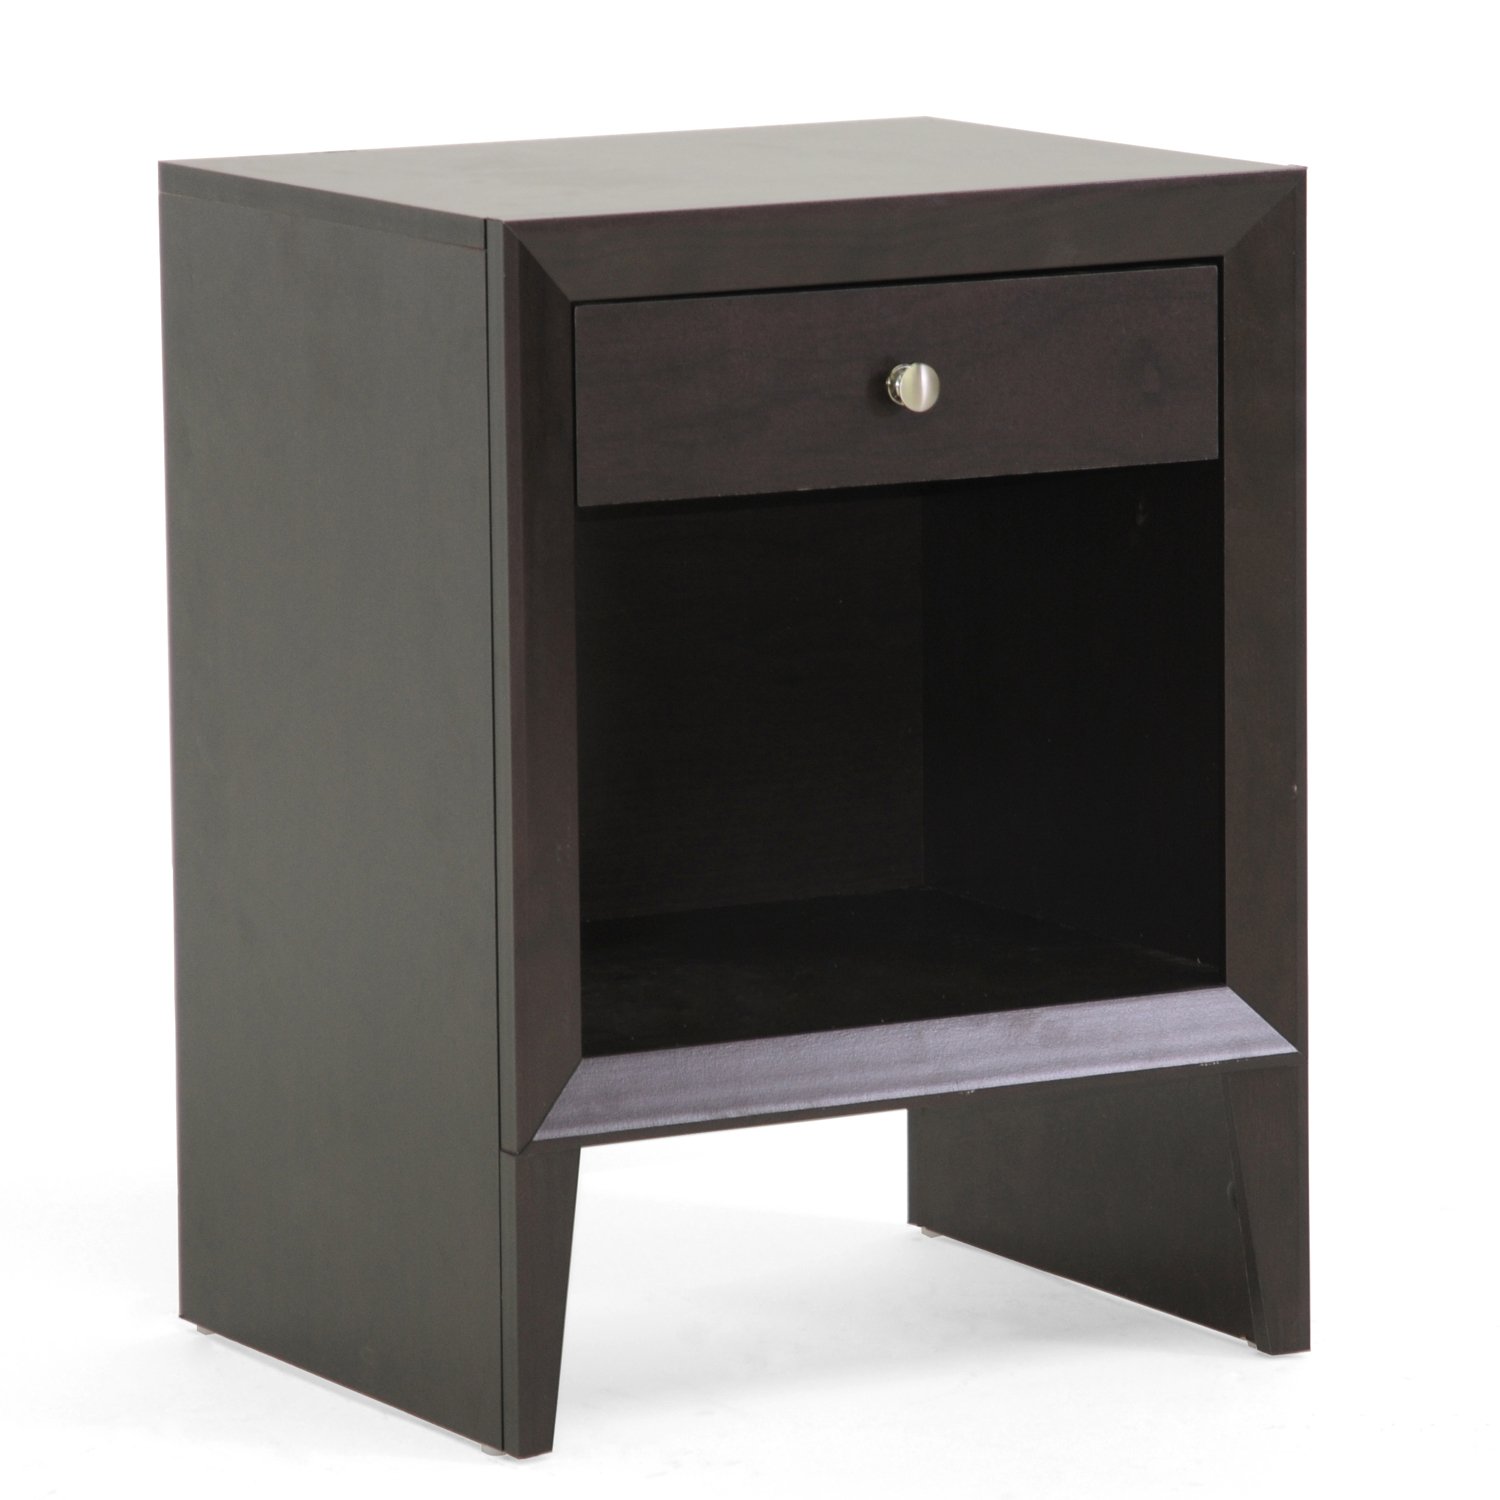 baxton studio leelanau modern accent table and eugene nightstand brown kitchen dining contemporary wood coffee tables end herman miller long side for living room apothecary pier